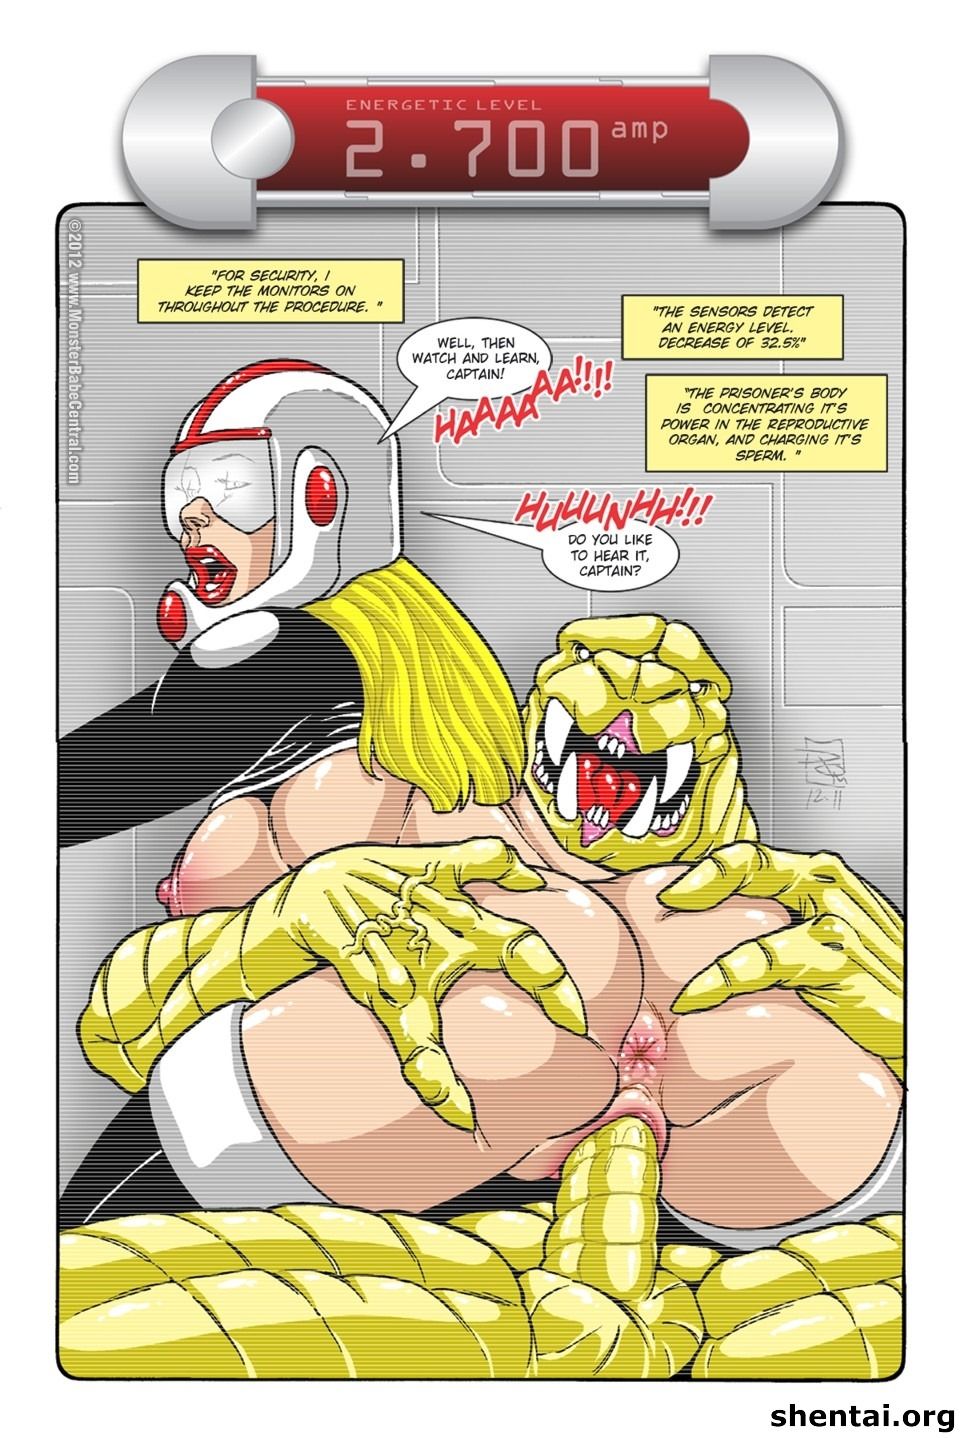 Omega Fighters 15-16,xxx Monster sex page 8